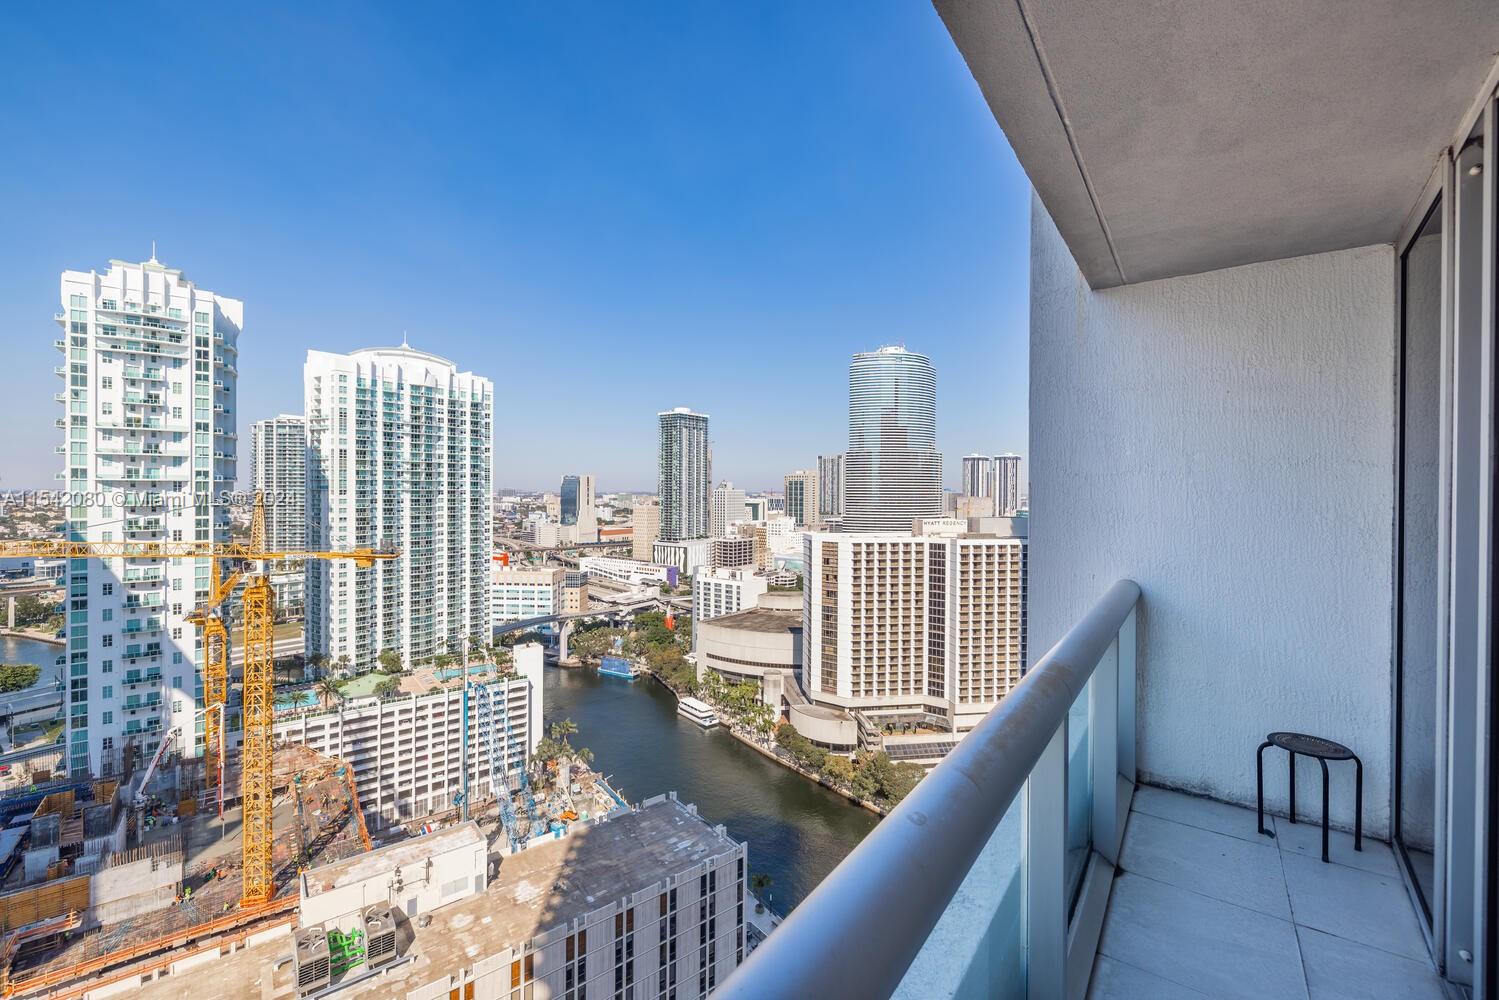 COZY FURNISHED STUDIO AT MUST DESIRABLE BUILDING IN BRICKELL, ICONBRICKELL TOWER THREE. STUDIO AVAILABLE FROM 1 WEEK AND LONGER TERM. FOR SHORT TERM LEASE TENANT MUST PAY THE 13% TAX AND $150 CLEANING EXIT FEE. UNIT HAS WIFI AND CABLE.